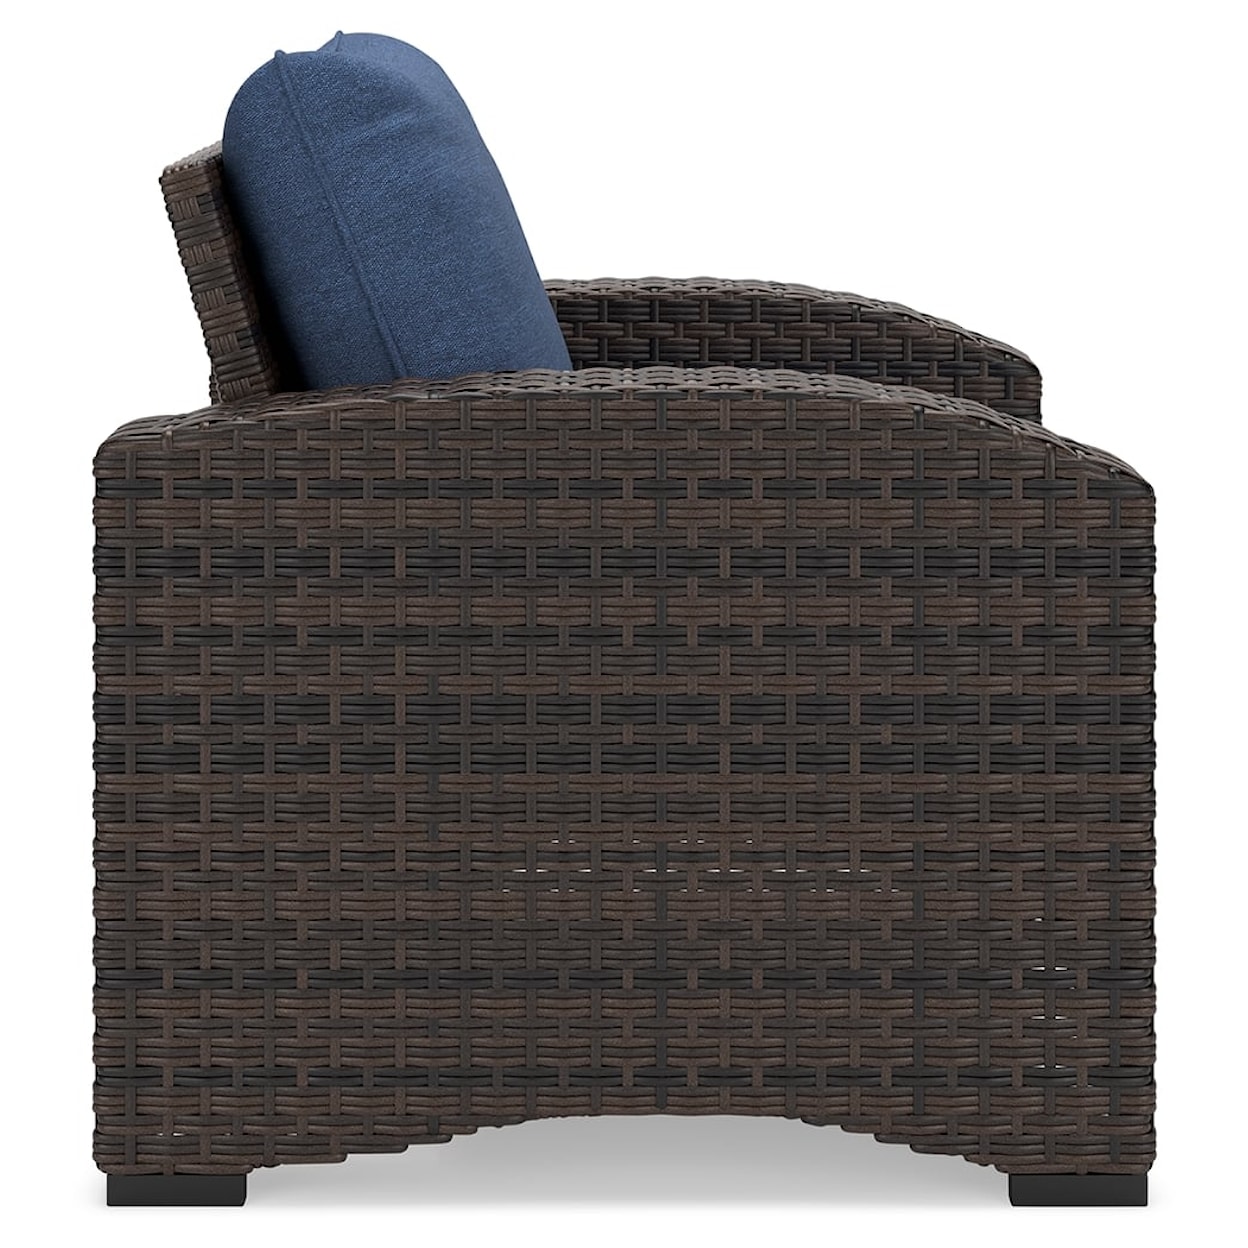 Signature Windglow Outdoor Lounge Chair with Cushion